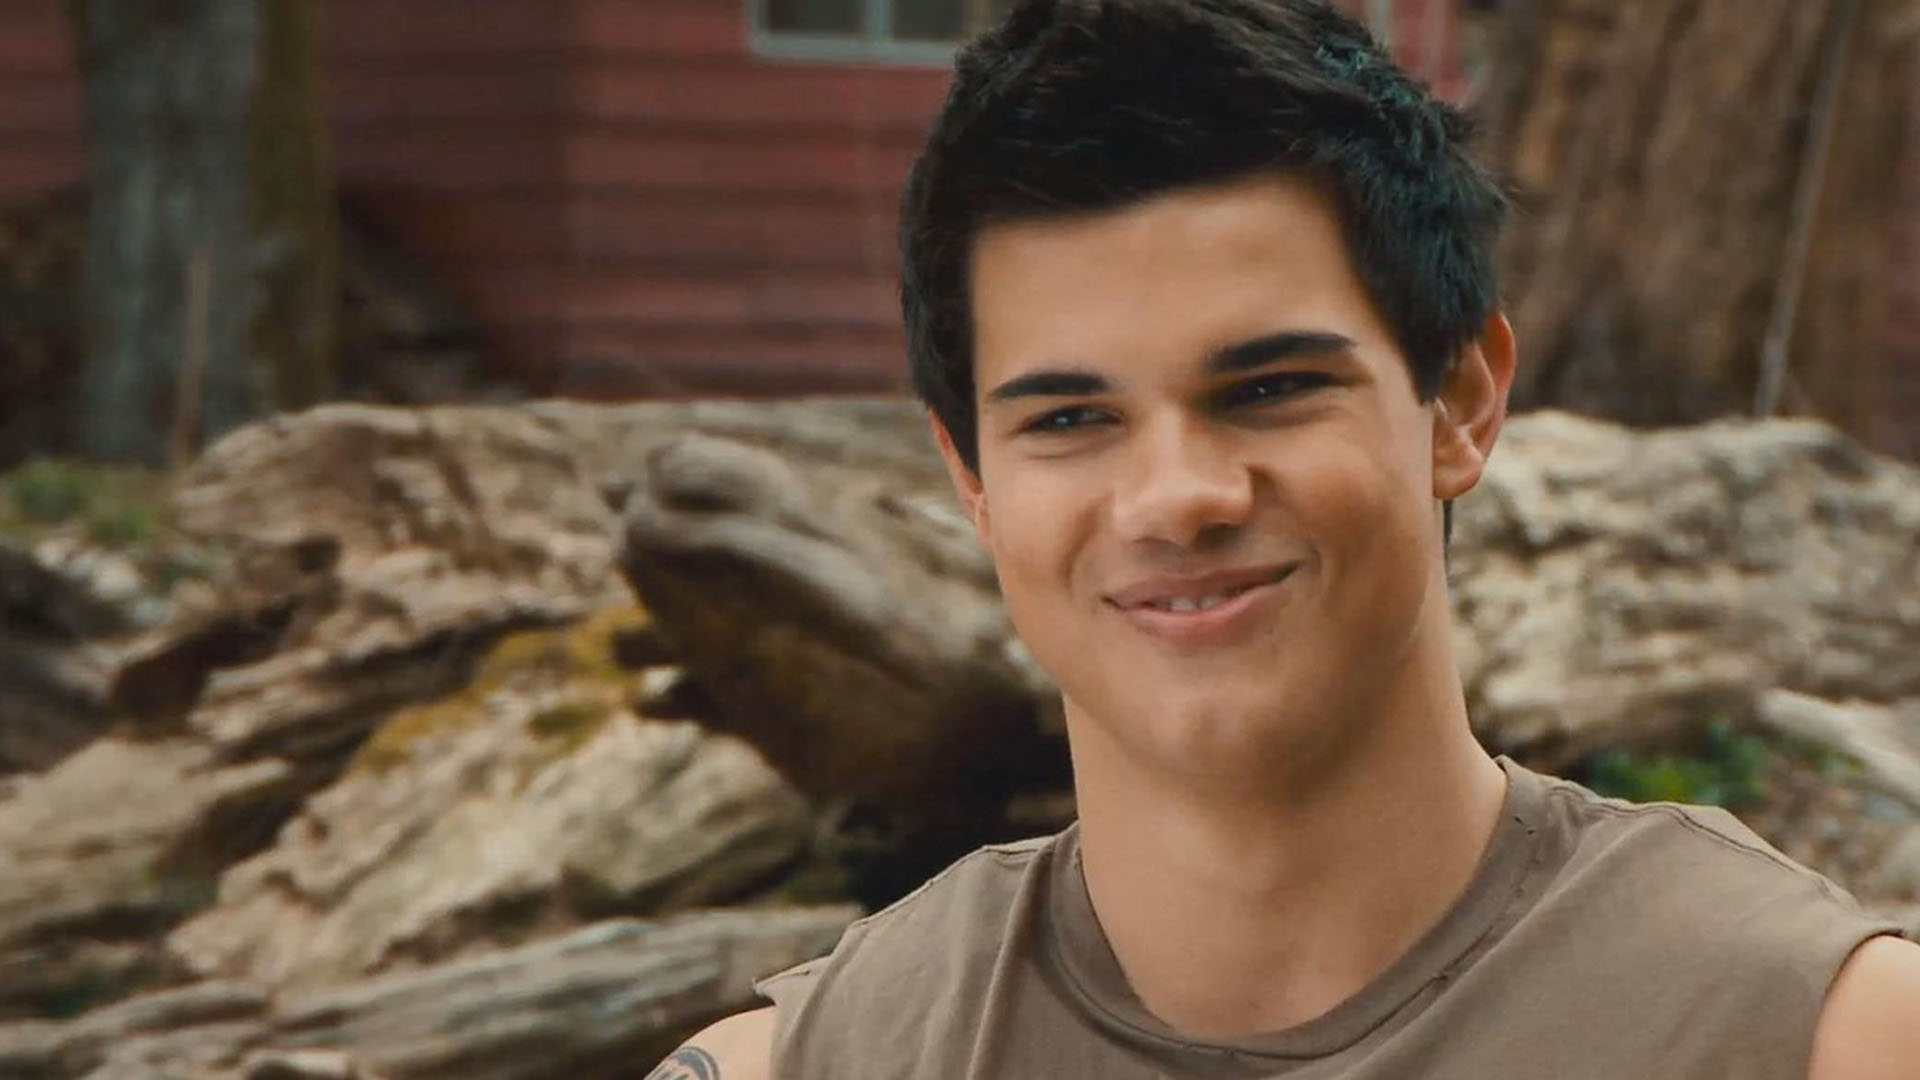 7 Actors Who'd Be Better Than Taylor Lautner as Jacob in Twilight TV Series